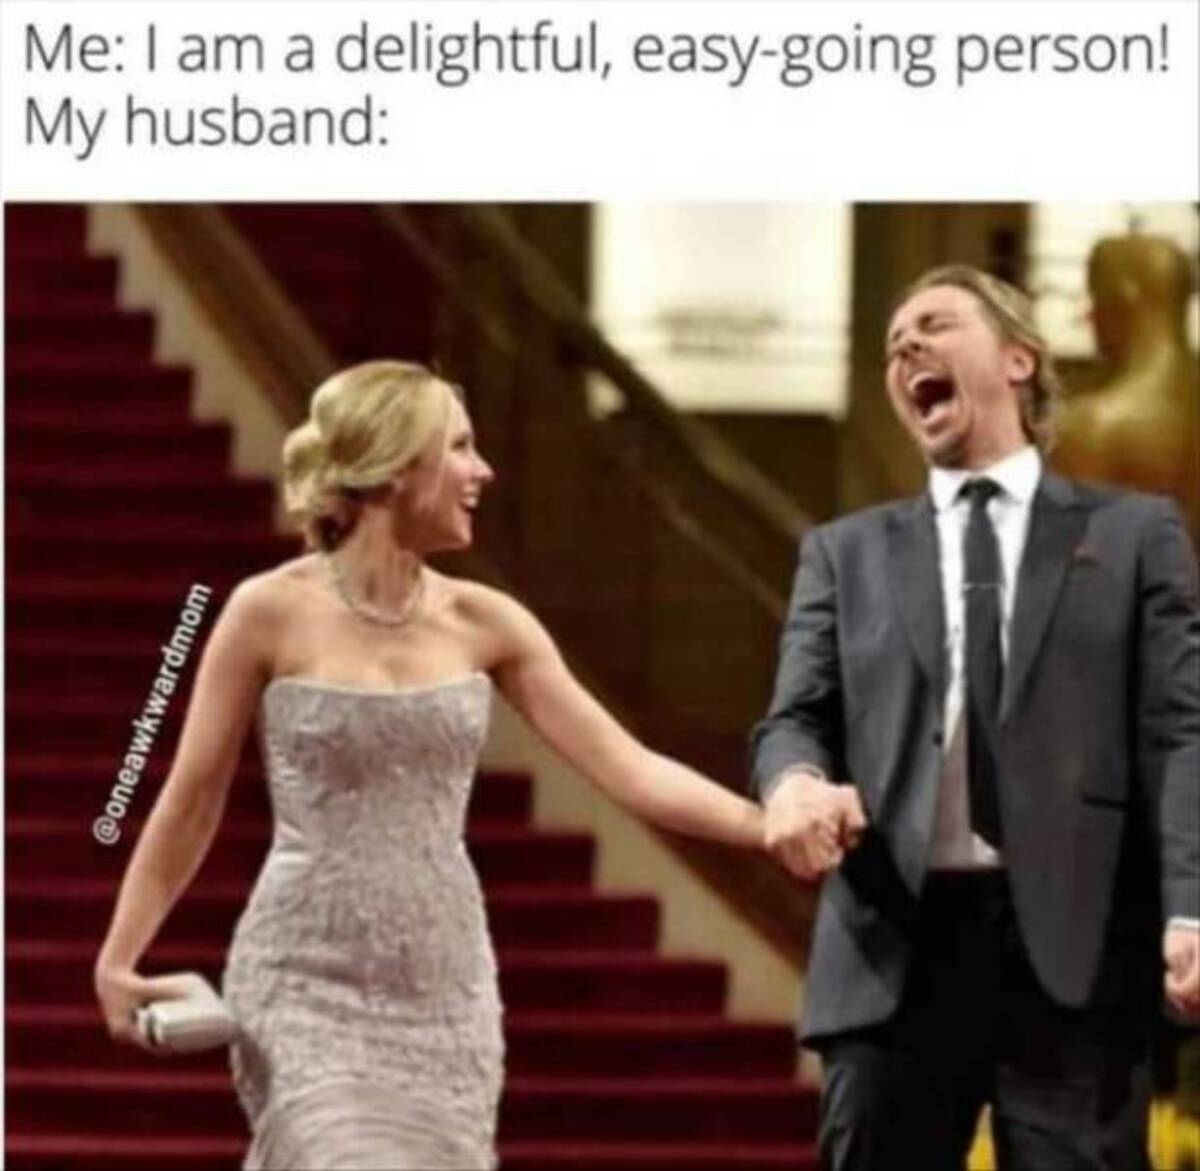 married memes - Me I am a delightful, easygoing person! My husband